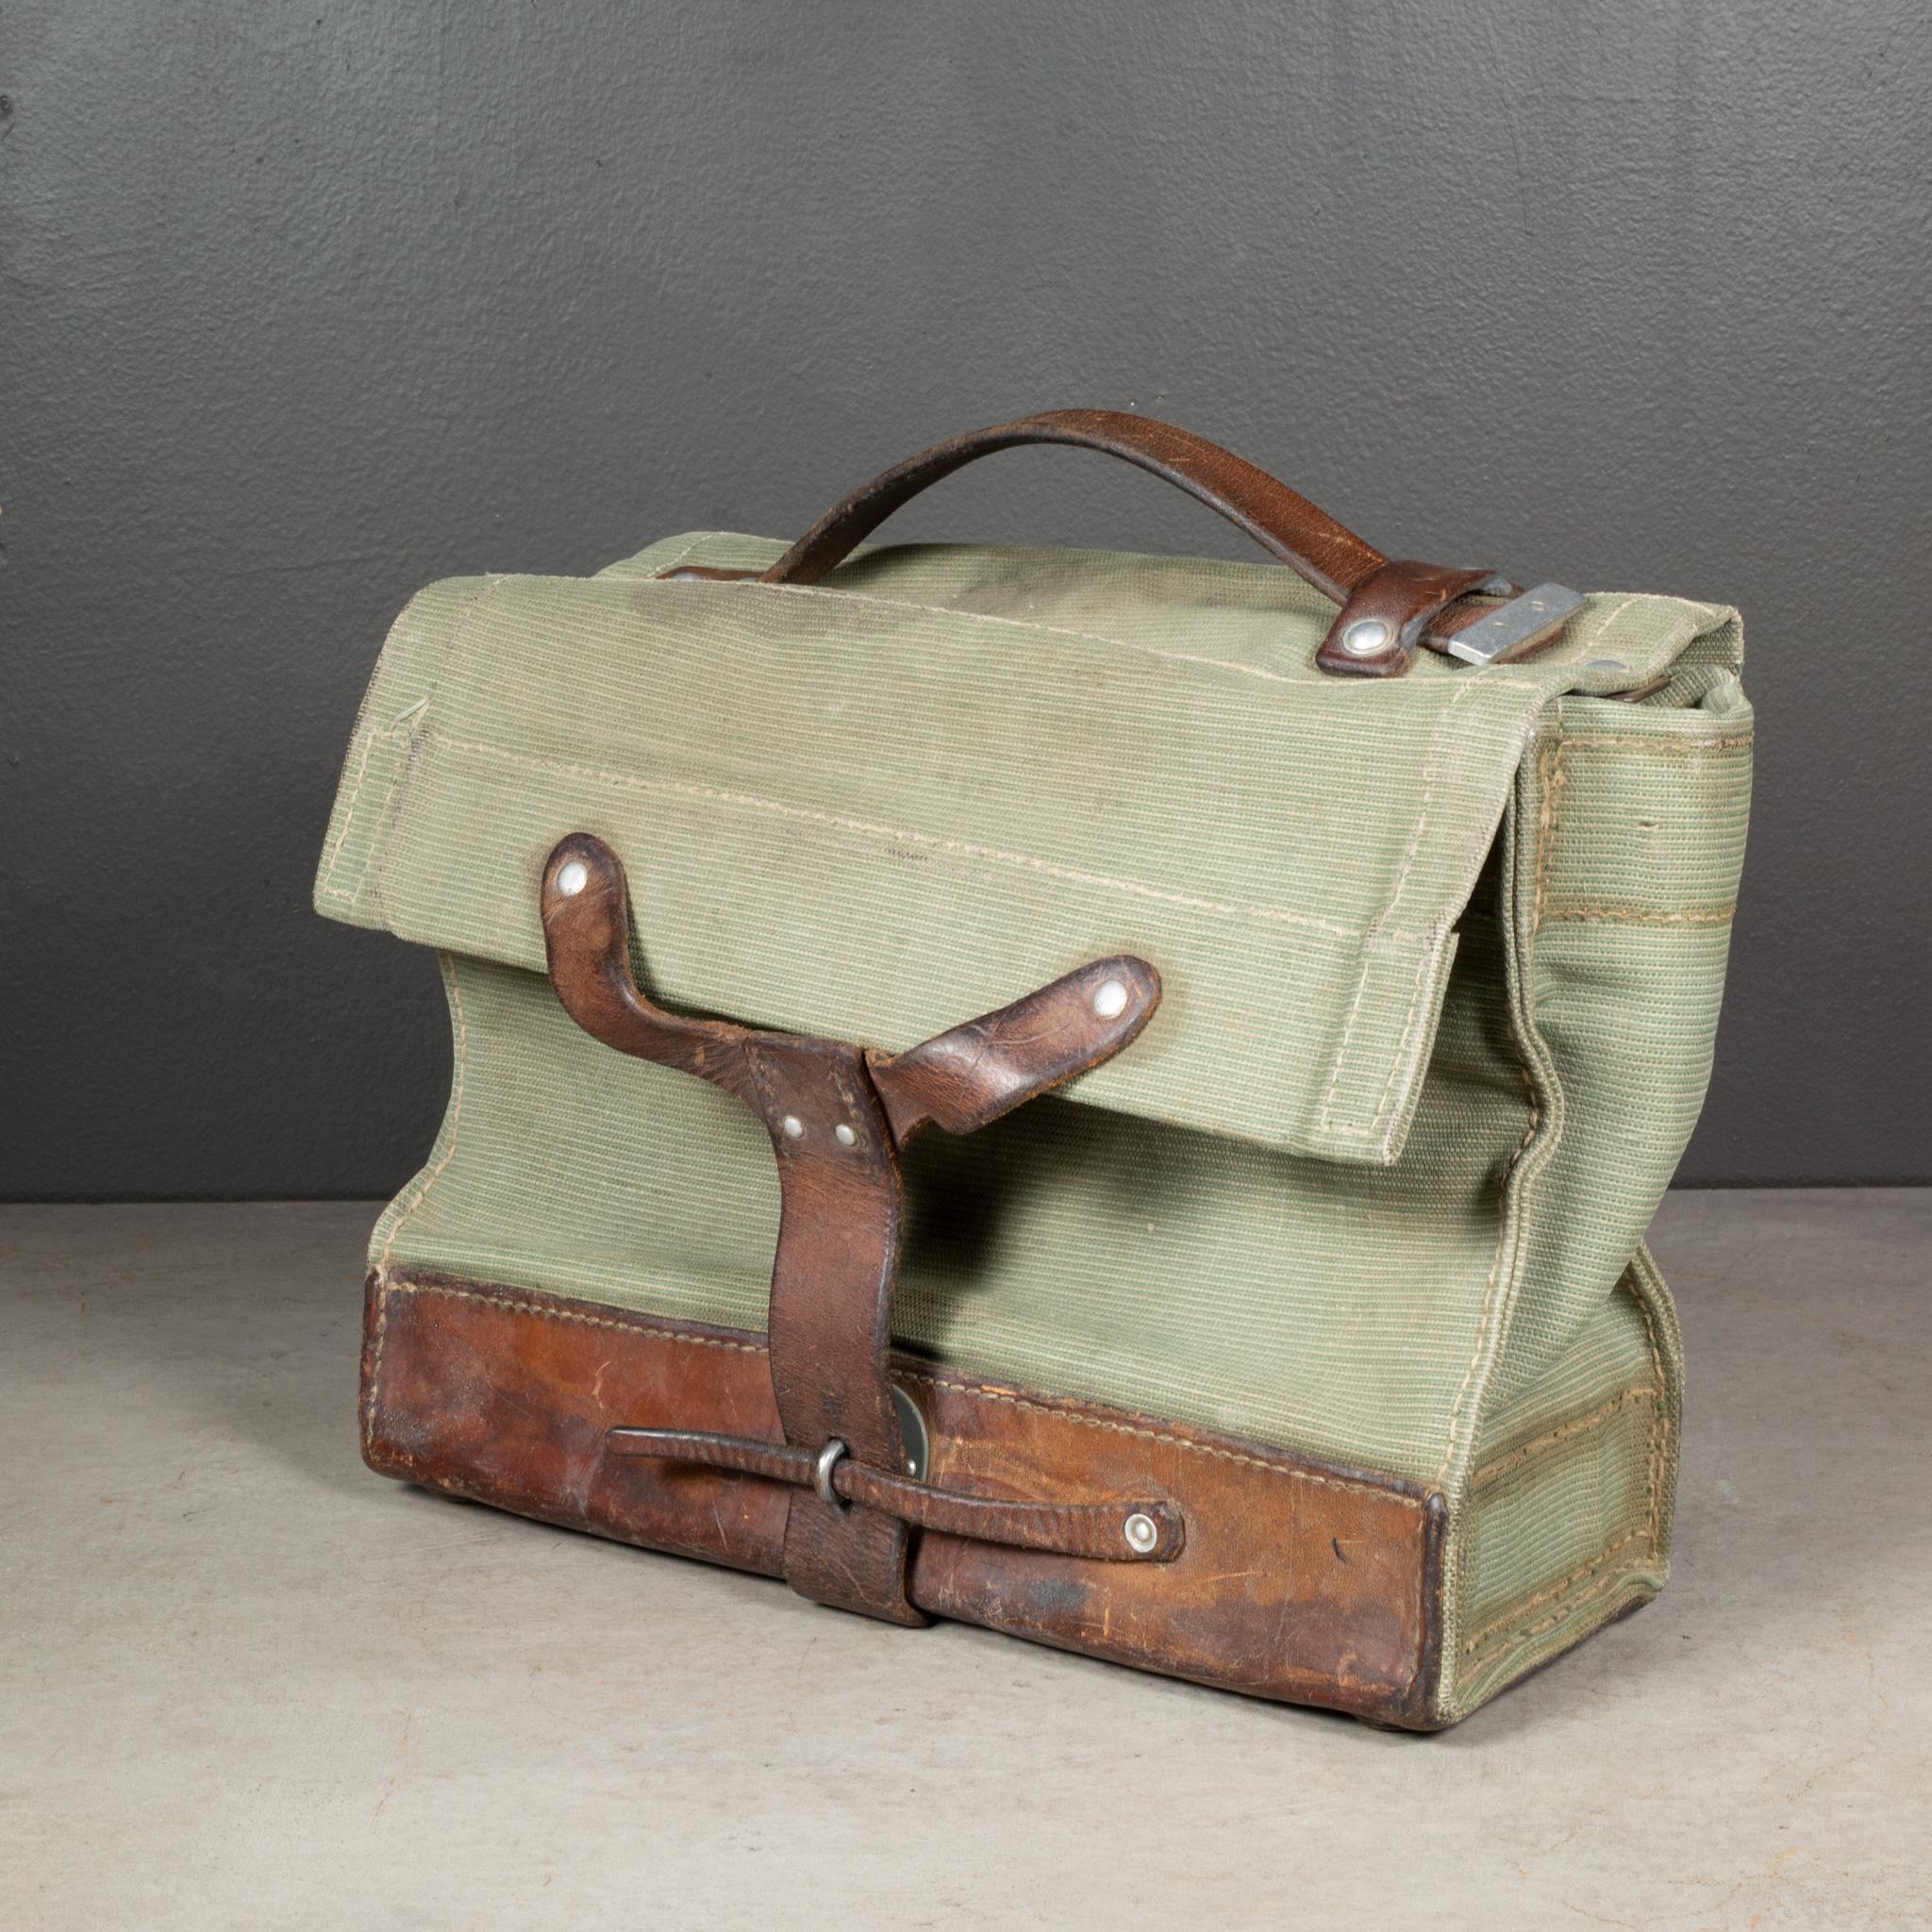 ABOUT

A vintage Swiss Army canvas and leather carrying case with silver rivets and brass feet. The interior inside top is lined with leather. Unique leather strap close. Swiss cross stamped on the front leather strap.

    CREATOR Unknown. Swiss